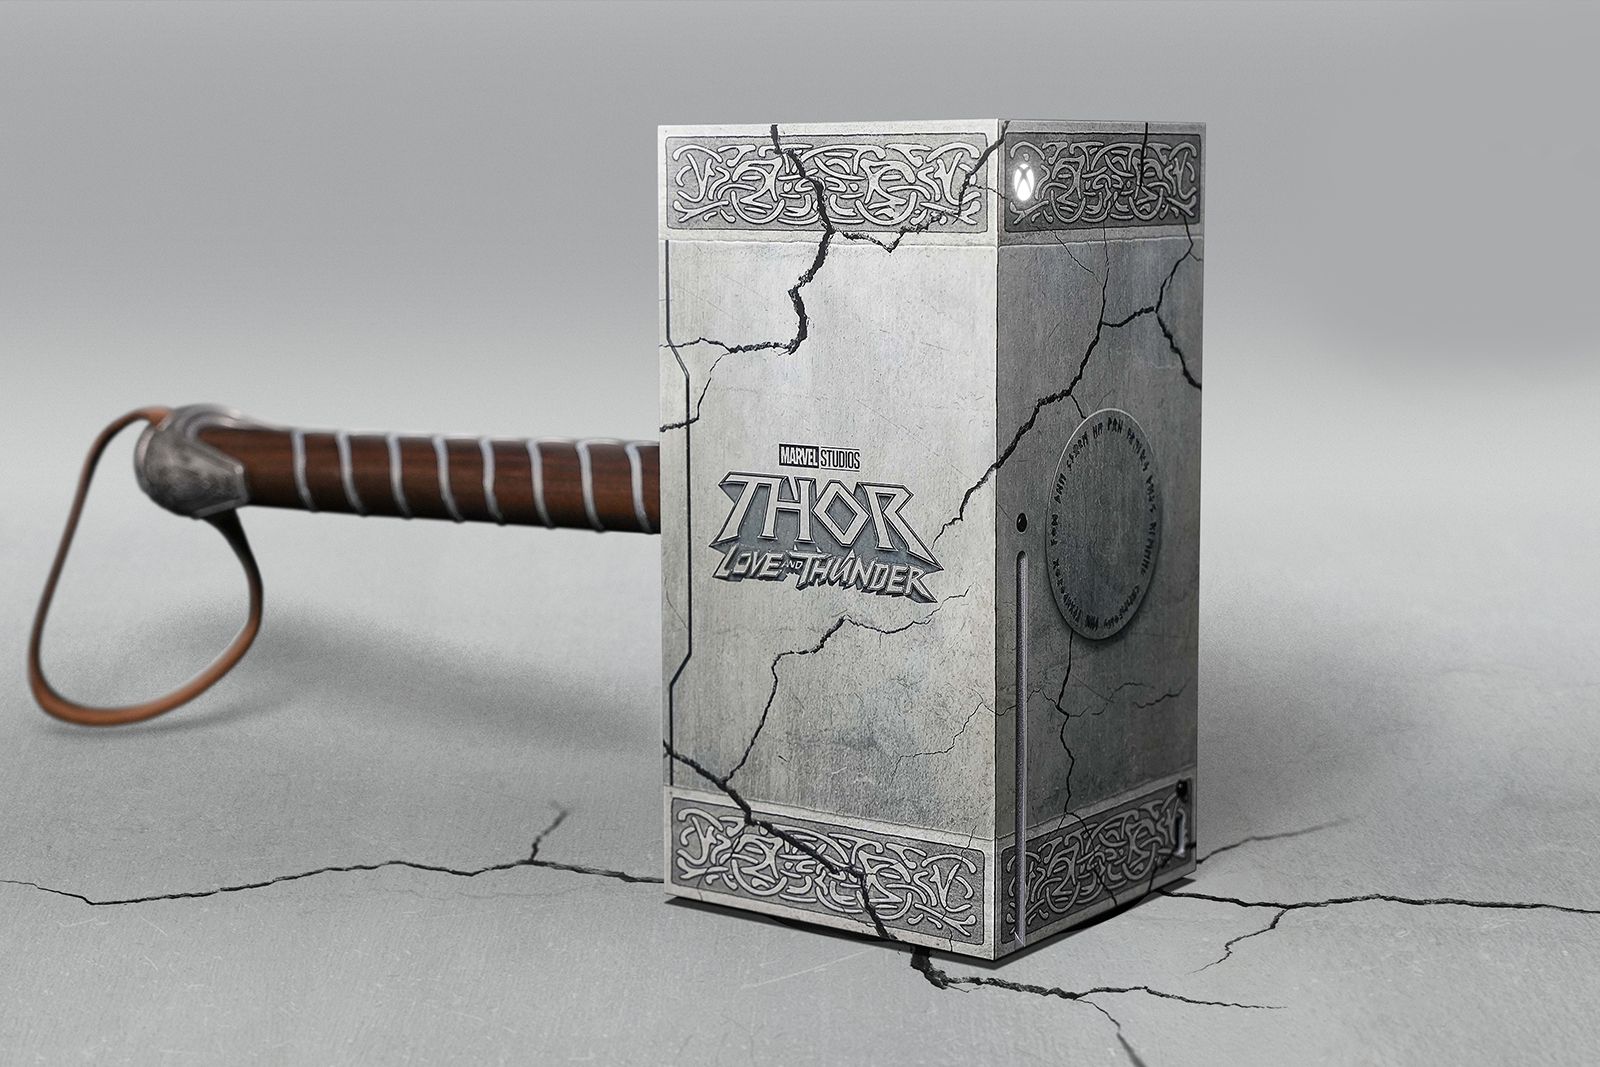 Xbox turned a Series X into Thor’s hammer photo 1